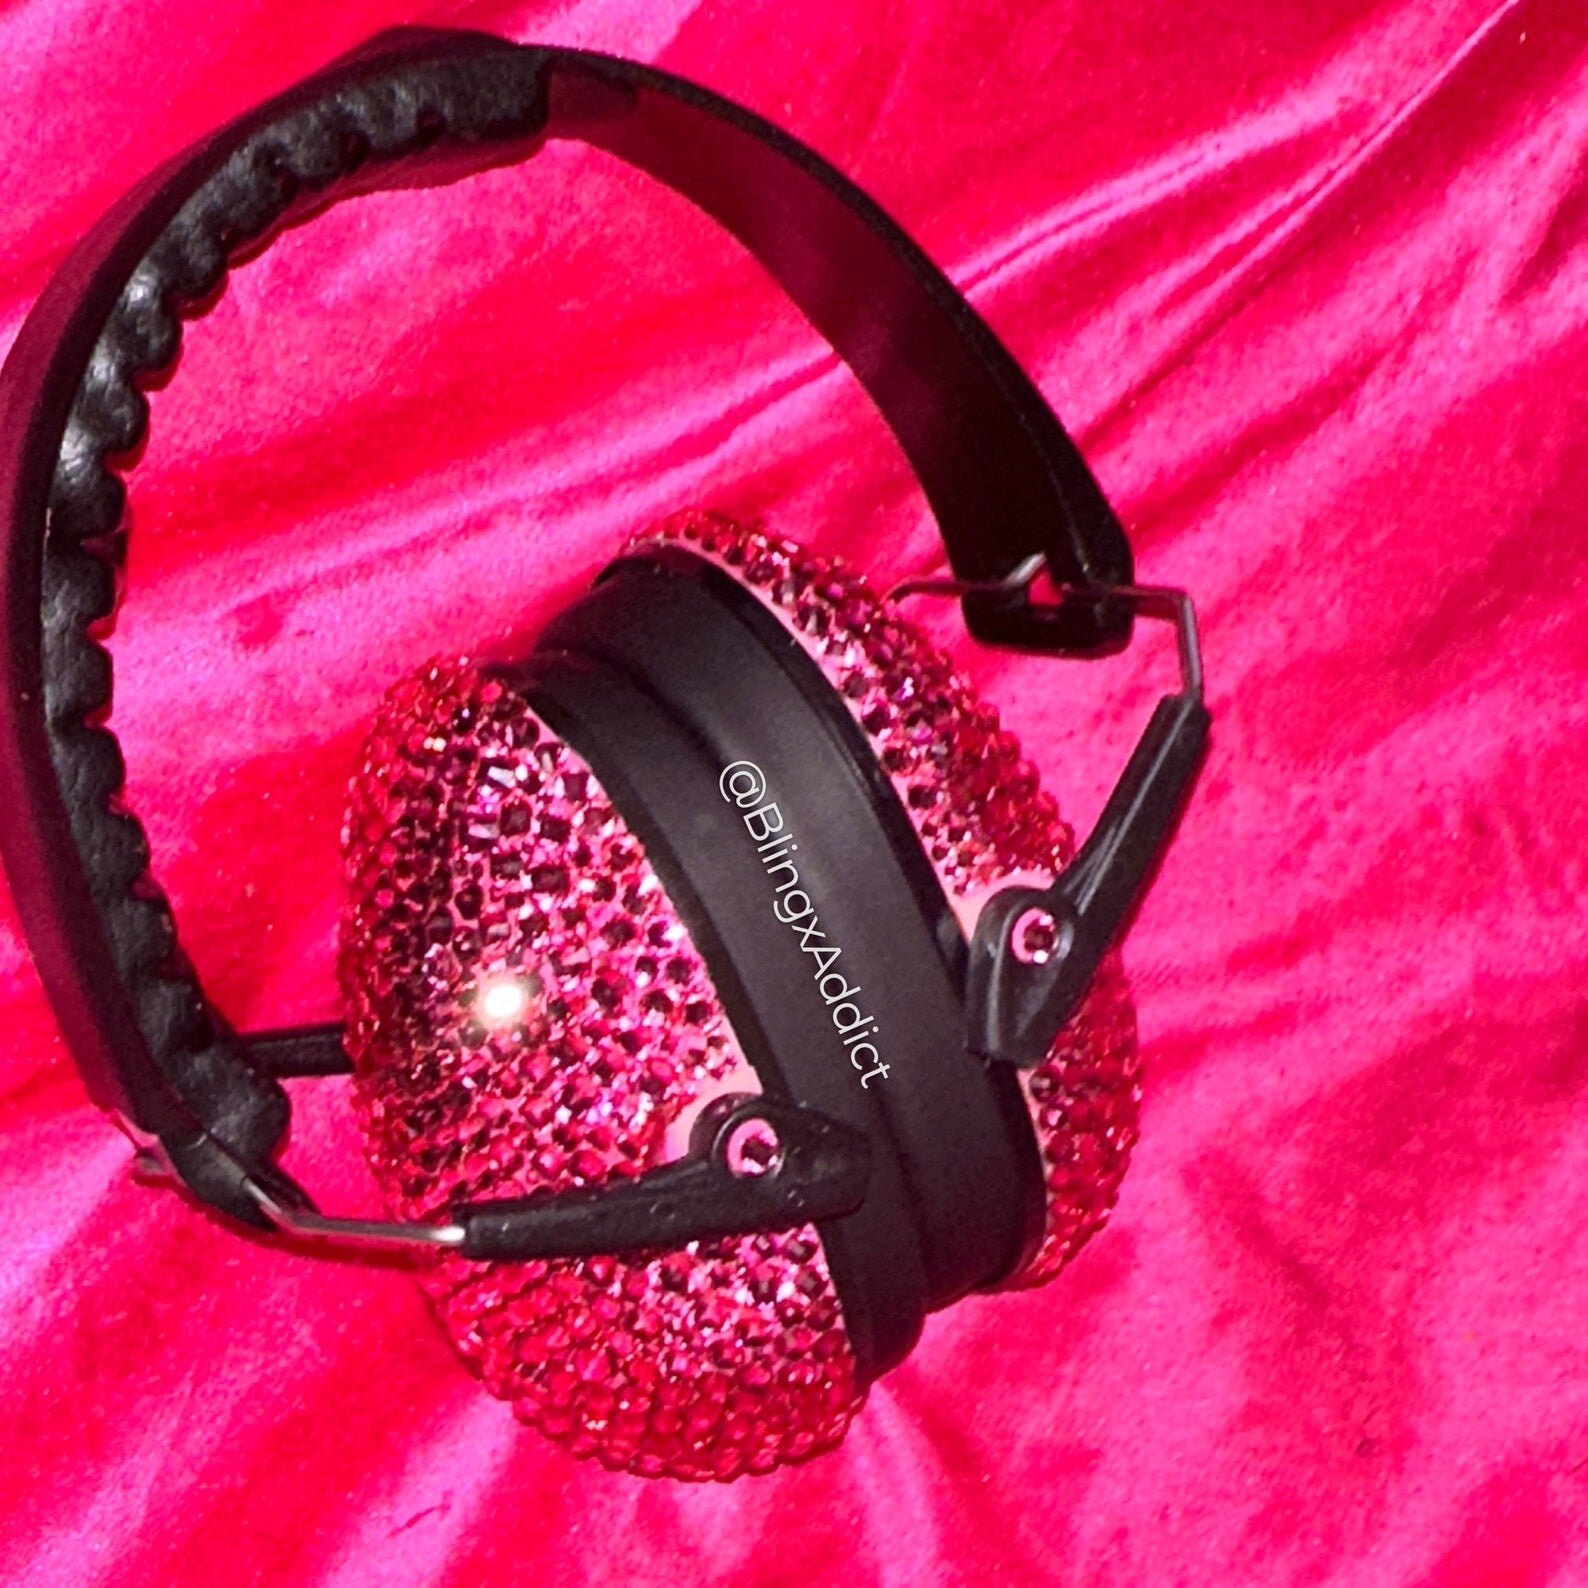 Crystalized Hearing Protection and Noise Reduction Earmuffs Lightweight, Adjustable and Foldable NRR 20dB Hot Pink CLOTHING, SHOES & ACCESSORIES by BlingxAddict | BlingxAddict